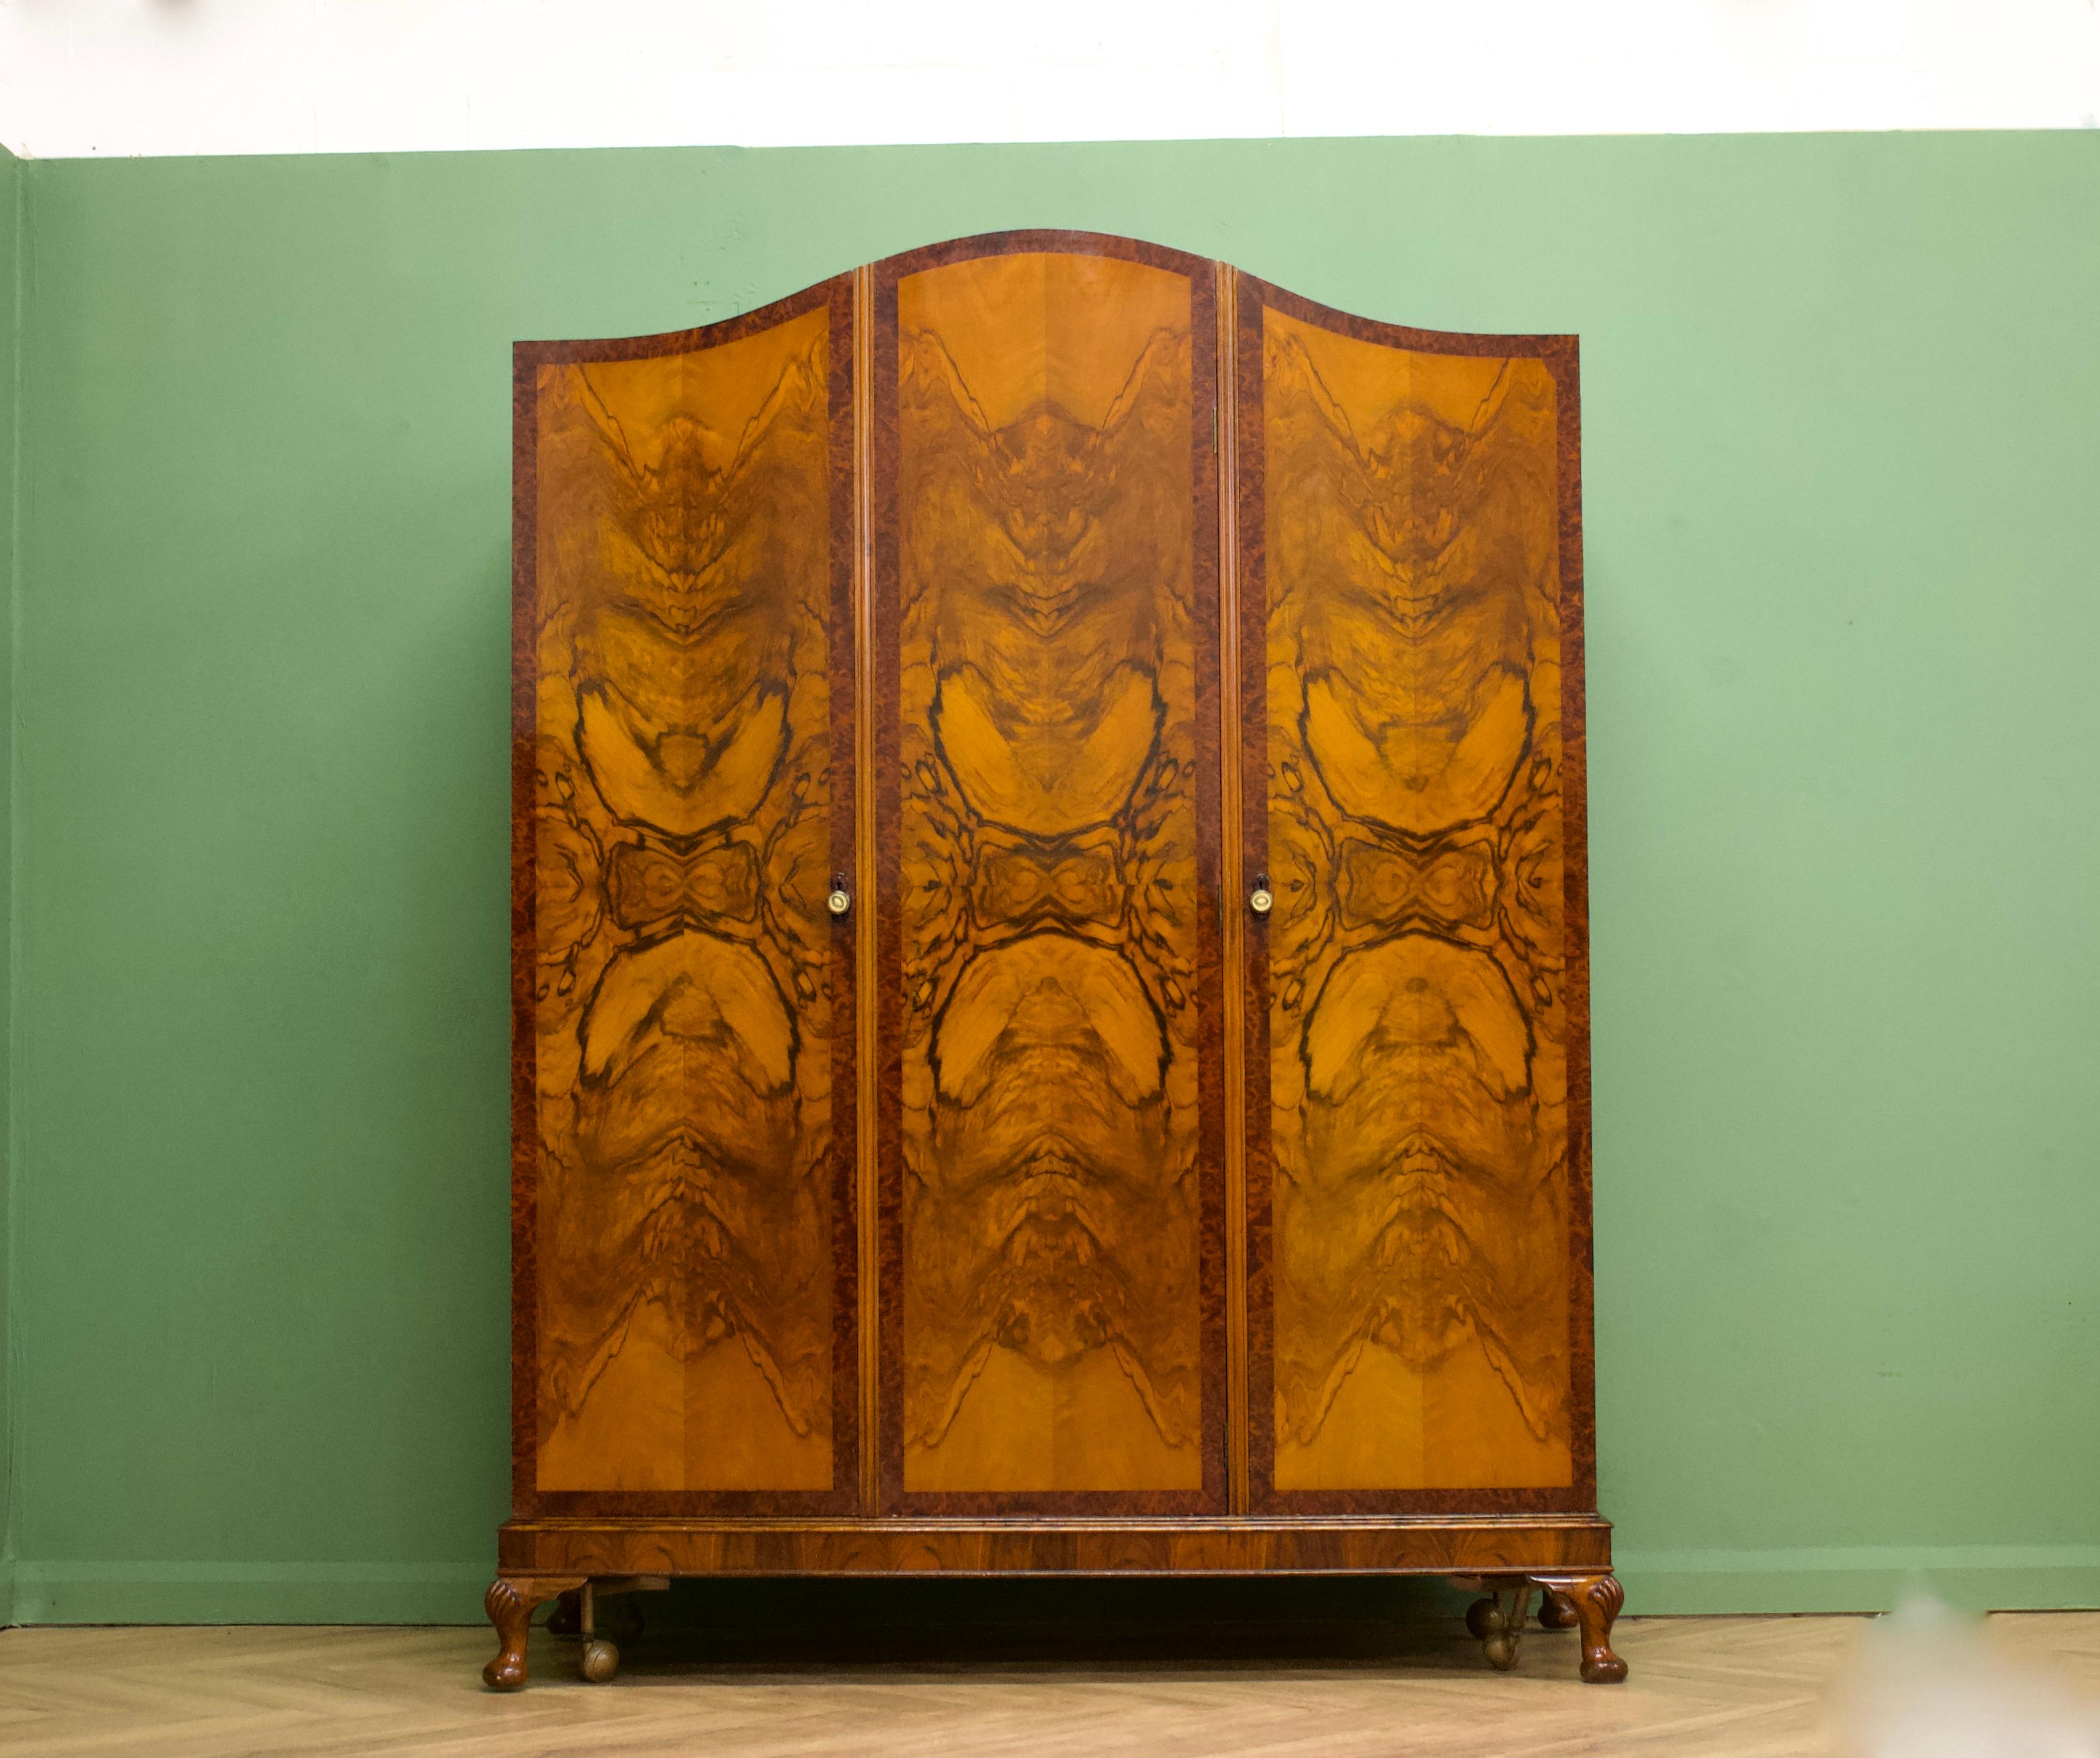 - Art Deco wardrobe
- Manufactured in the UK - in the style of Waring and Gillow
- Made from solid wood and burr walnut veneers
- The wardrobe sits on castors which are removable
- Featuring internal full length mirrors, a hanging rail, shoe